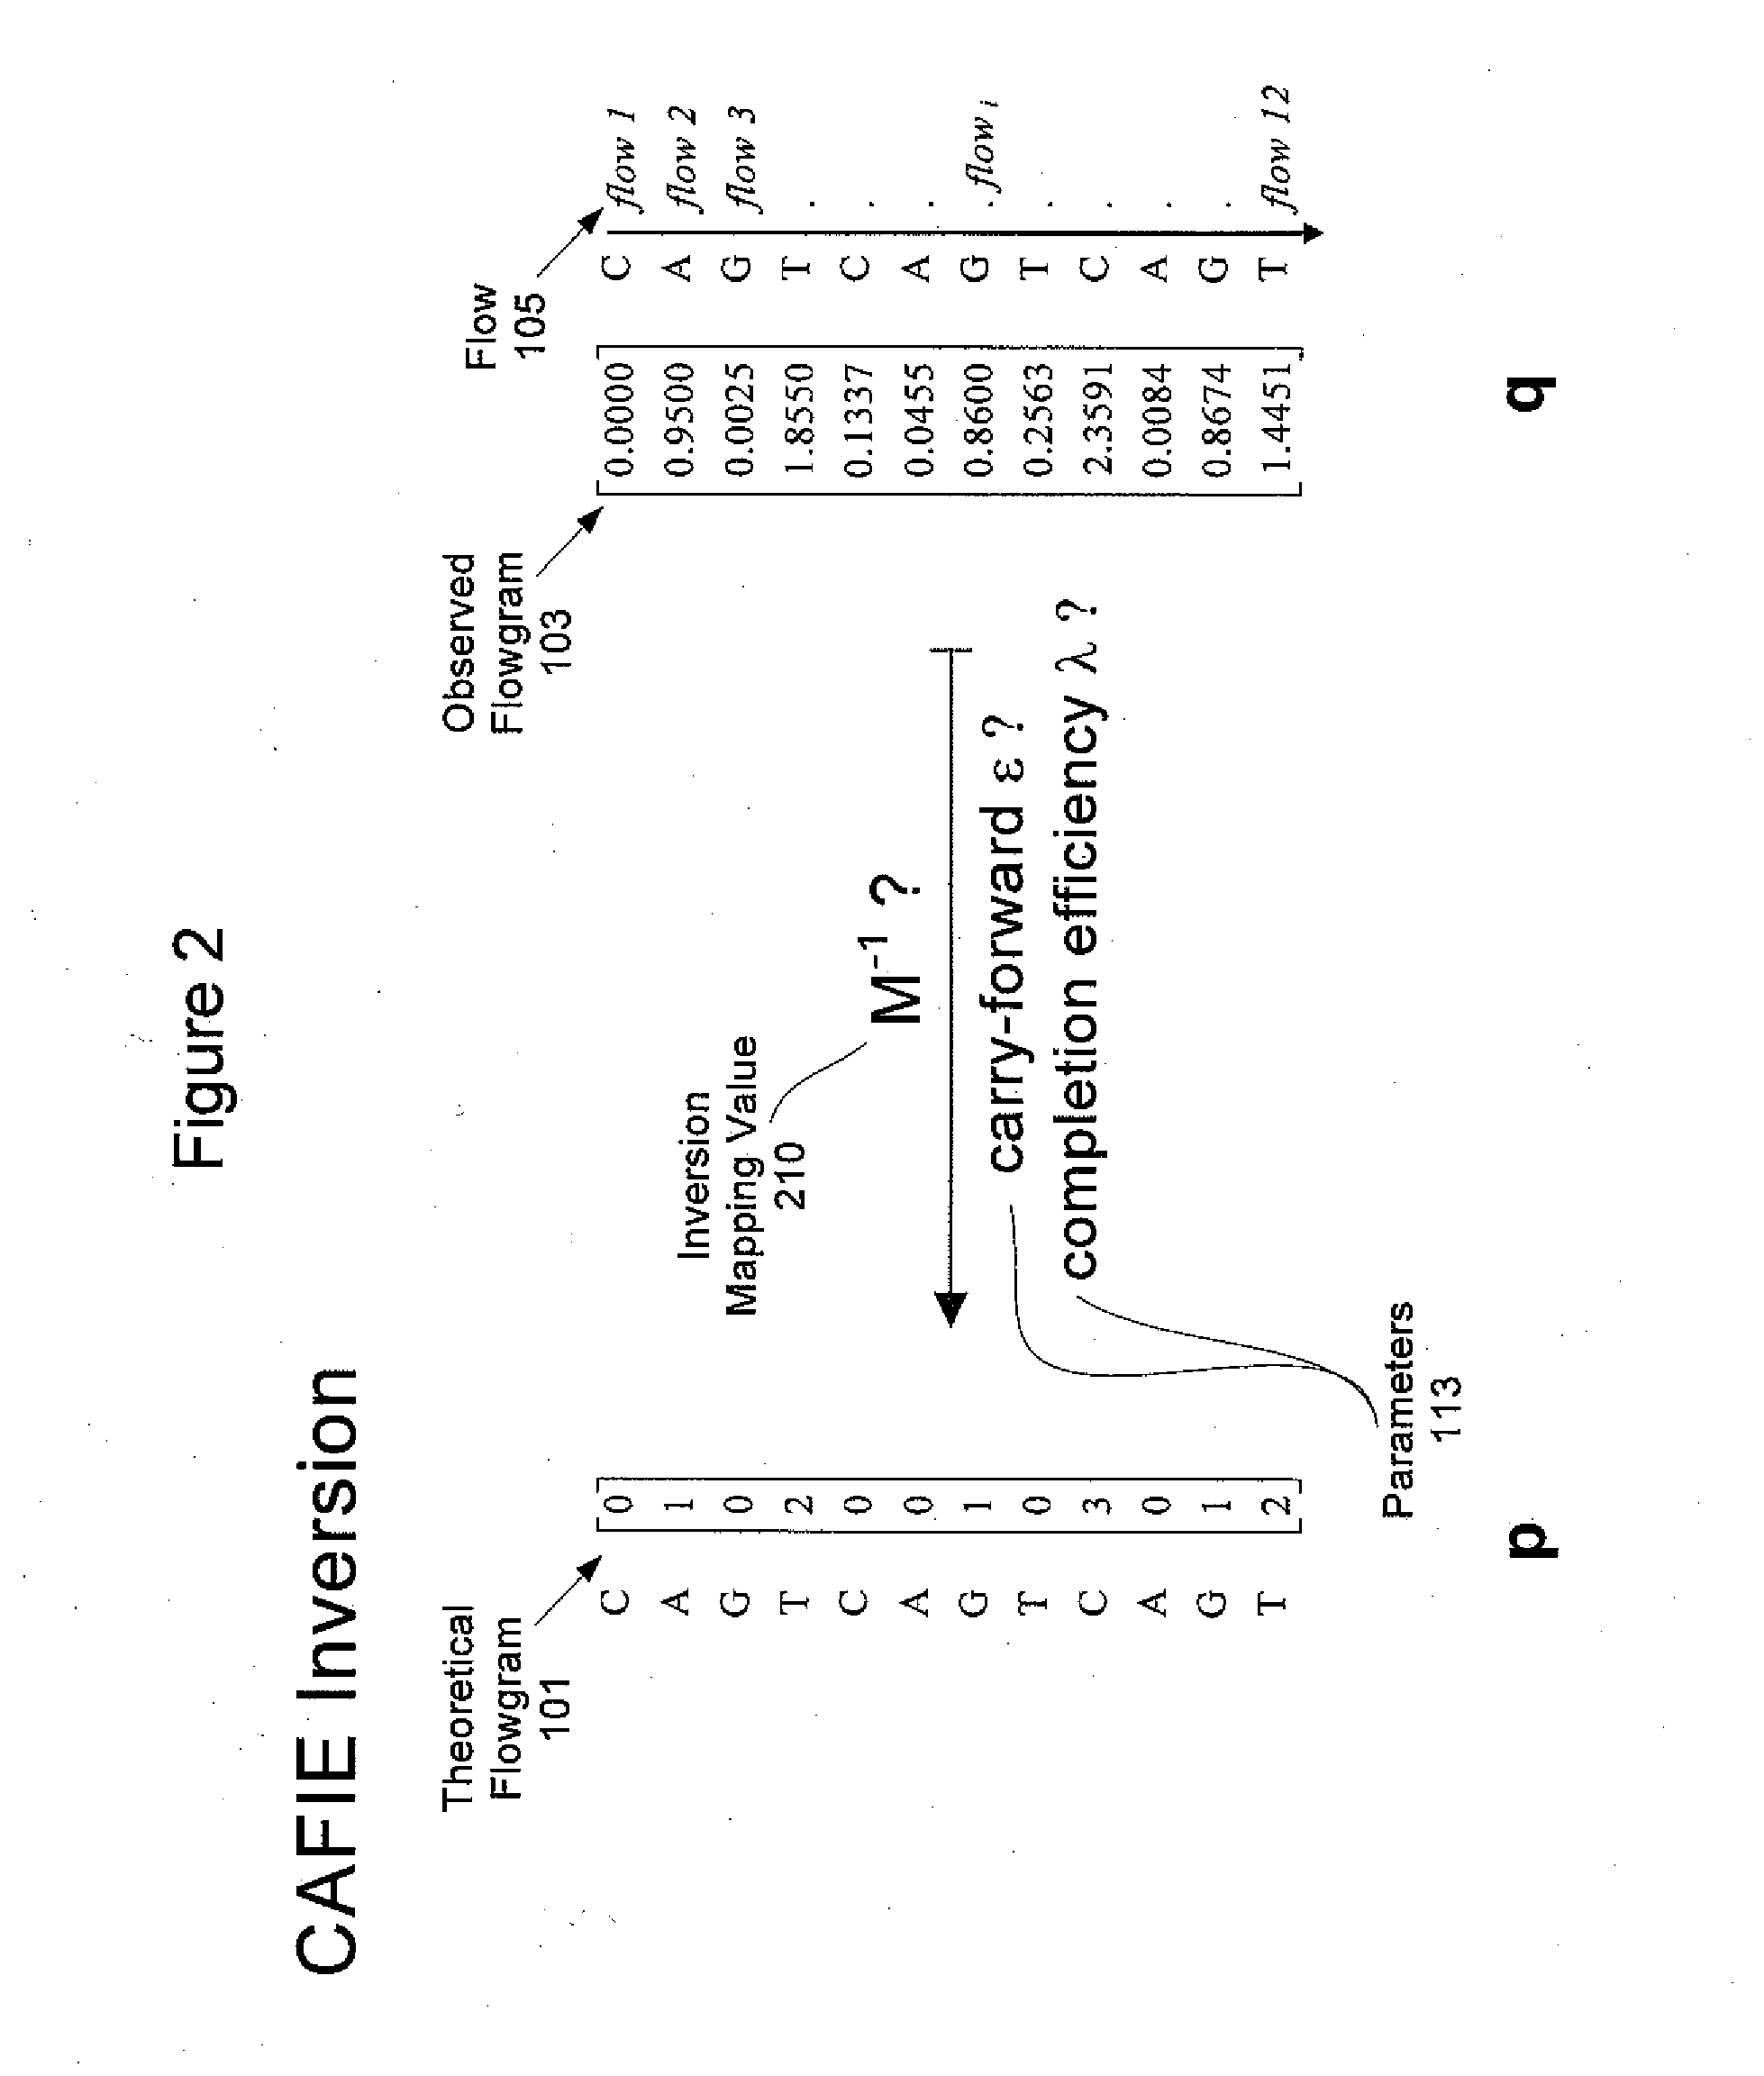 System and method to correct out of phase errors in DNA sequencing data by use of a recursive algorithm